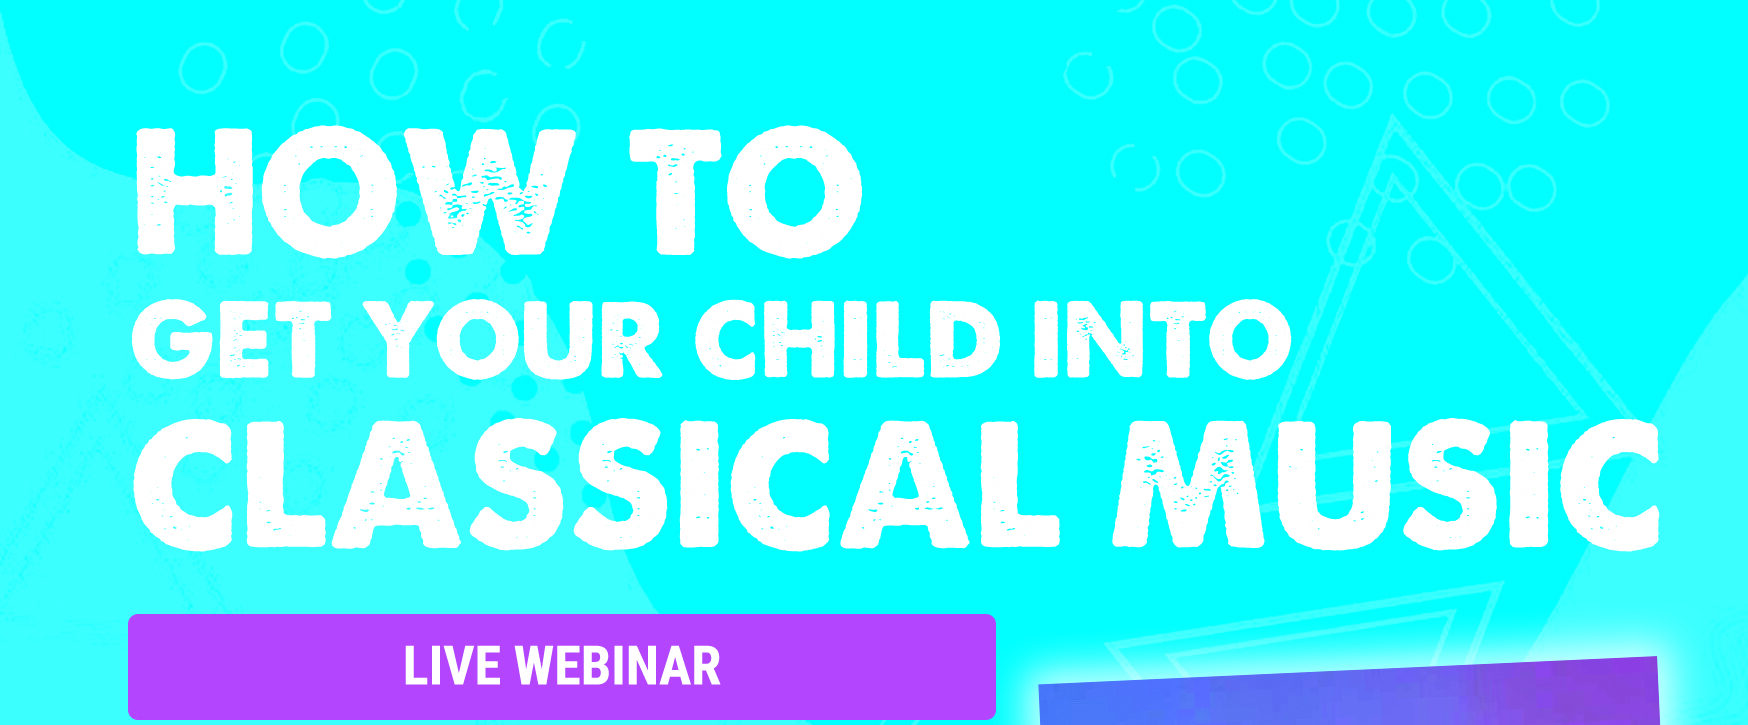 HOW TO GET YOUR CHILD INTO CLASSICAL MUSIC - FREE WEBINAR